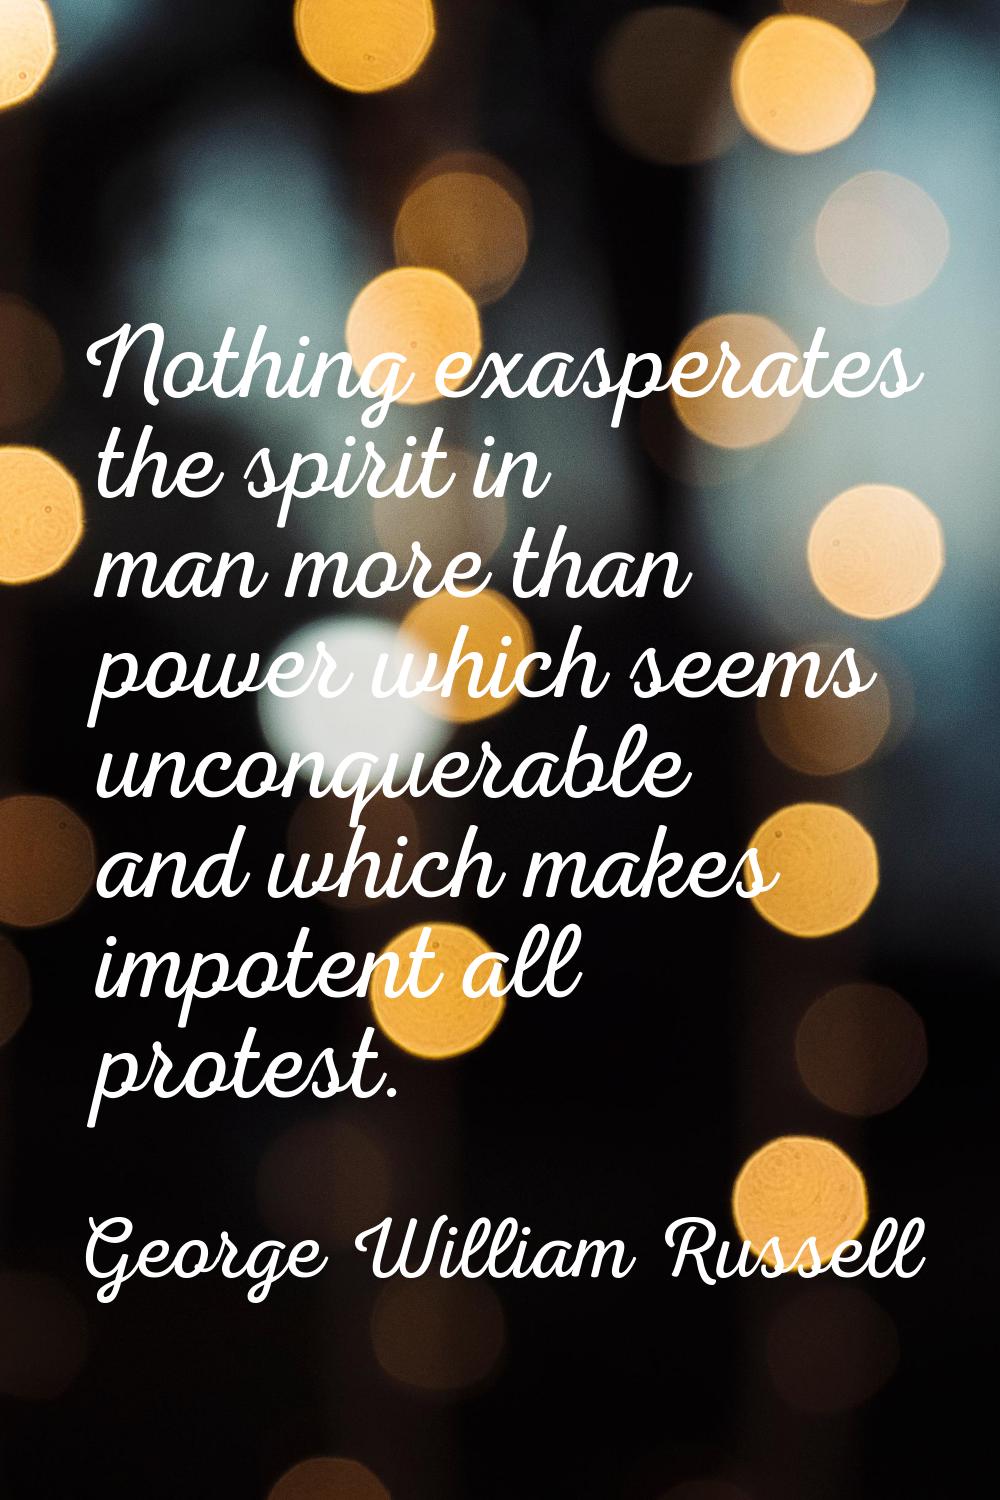 Nothing exasperates the spirit in man more than power which seems unconquerable and which makes imp